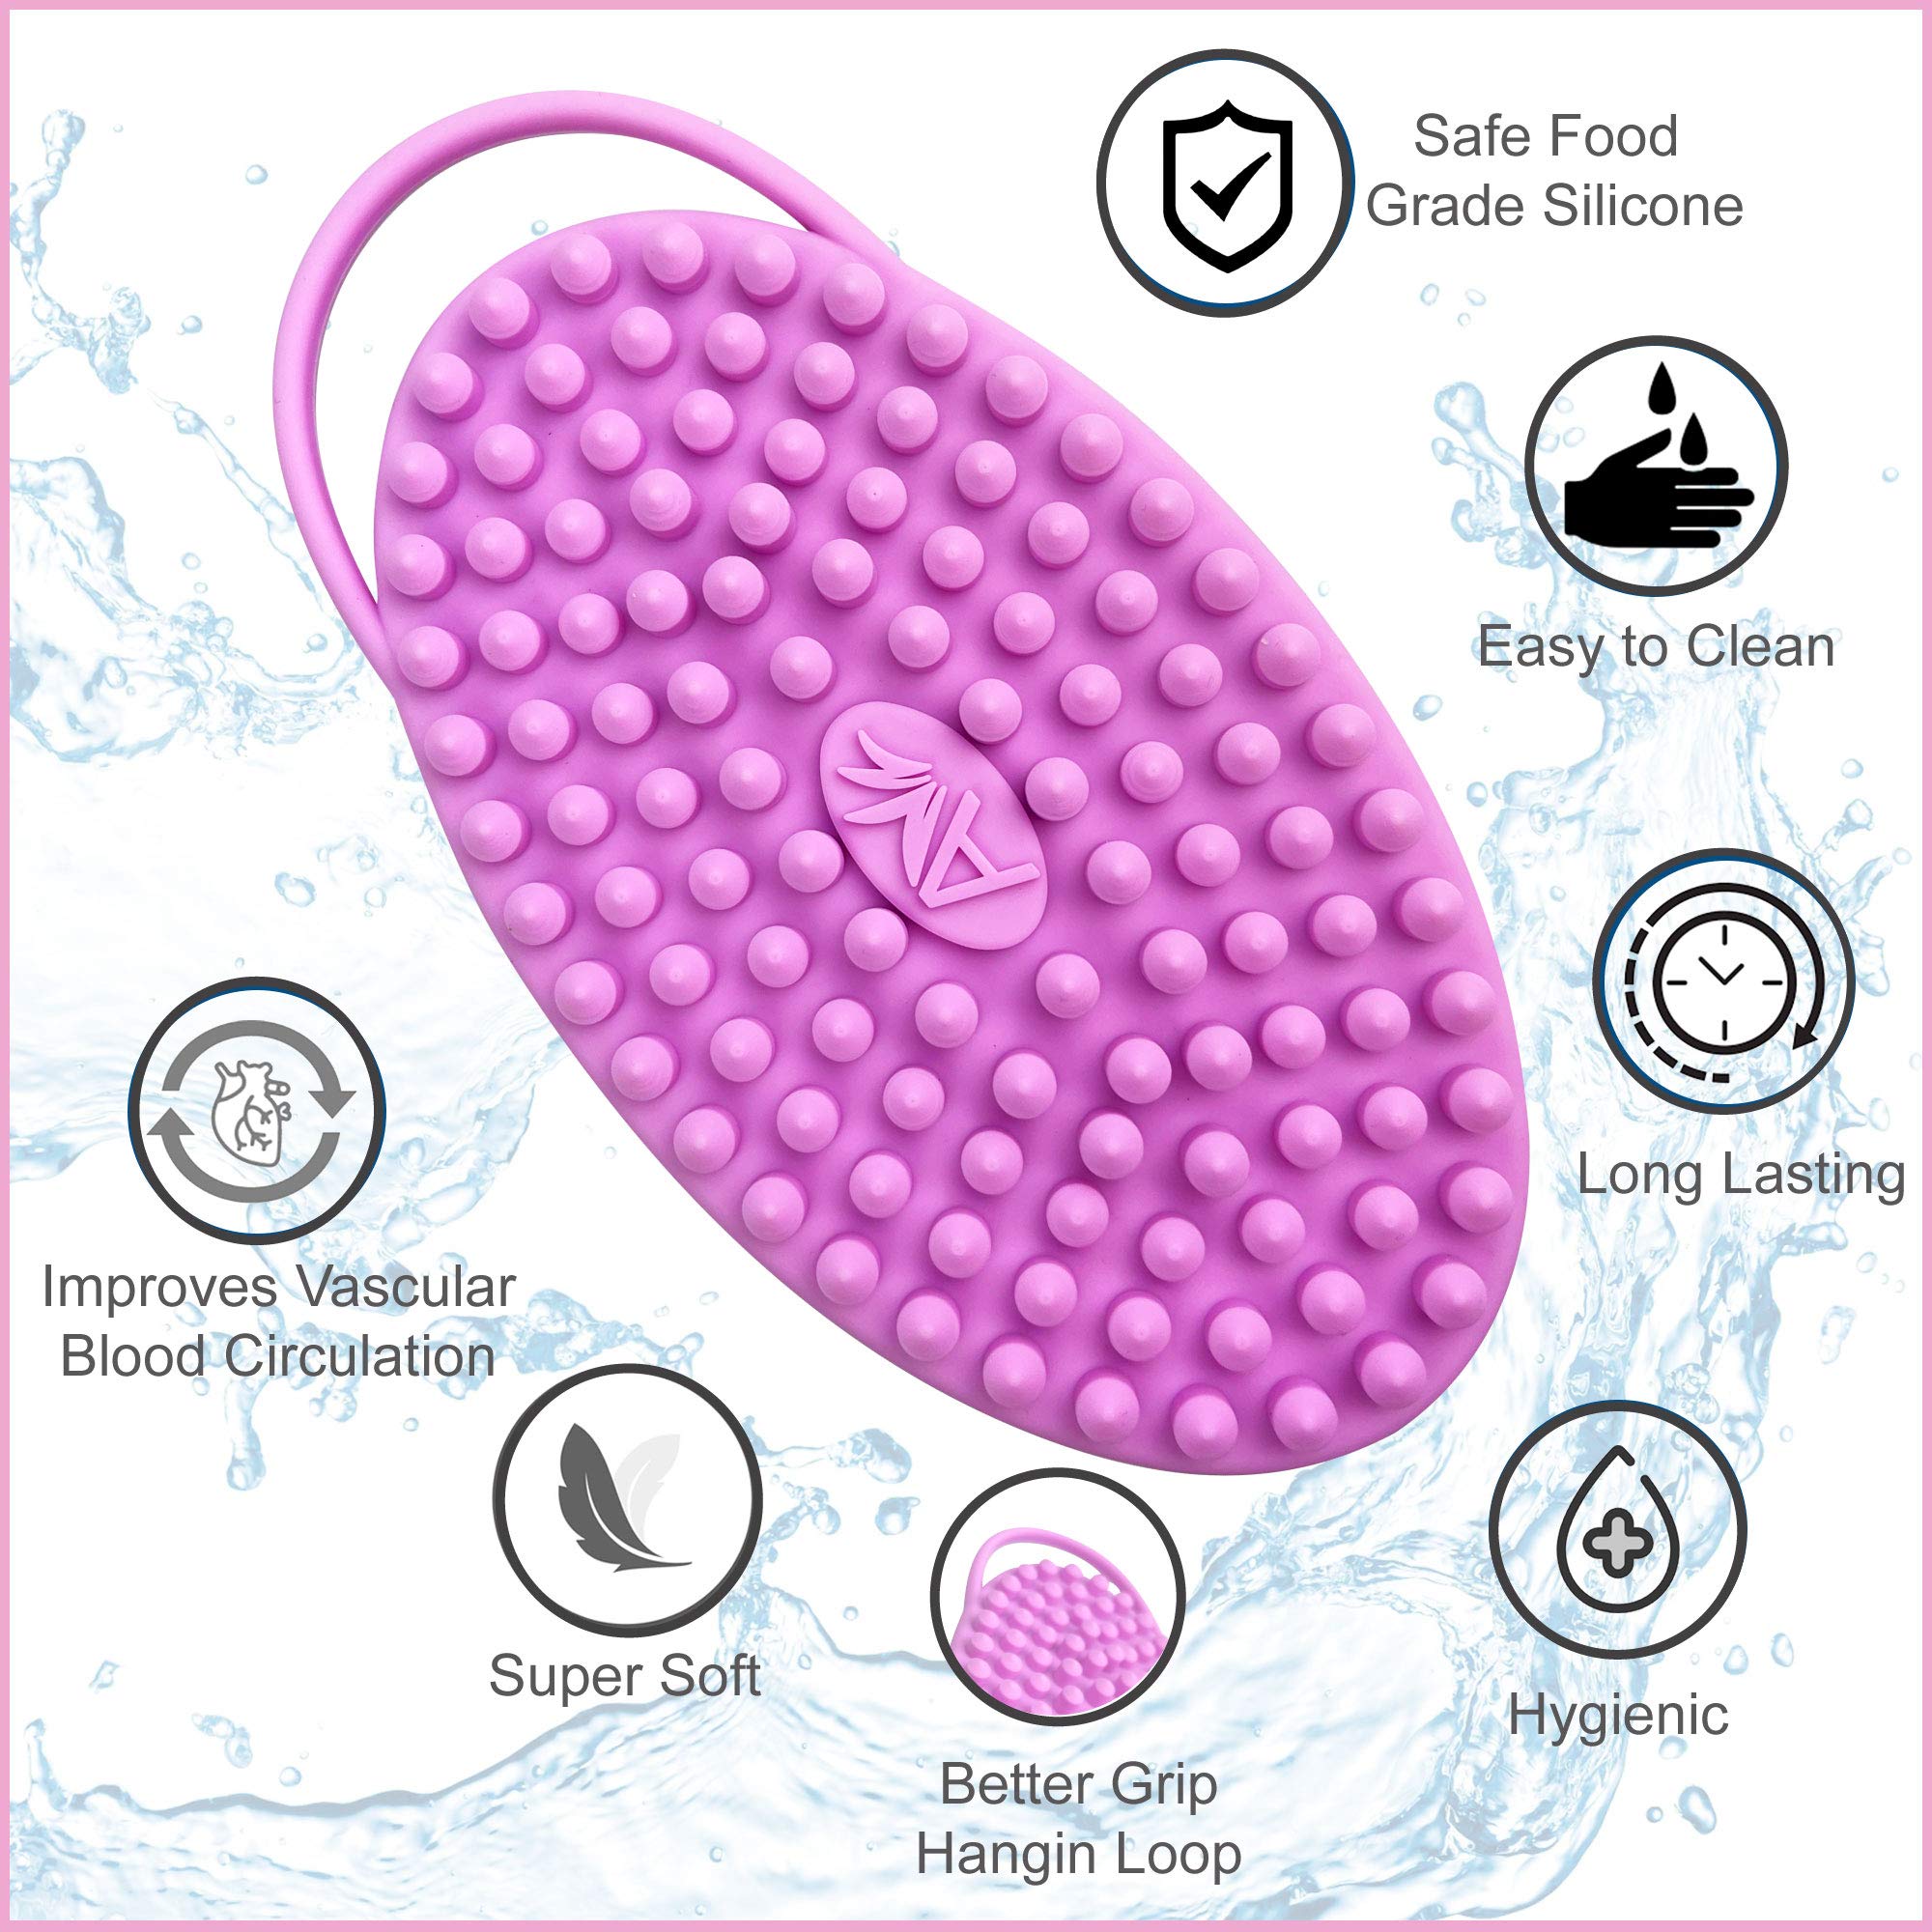 Avilana Exfoliating Silicone Body Scrubber Easy to Clean, Lathers Well, Long Lasting, and More Hygienic Than Traditional Loofah (Style 1, Dark Gray)